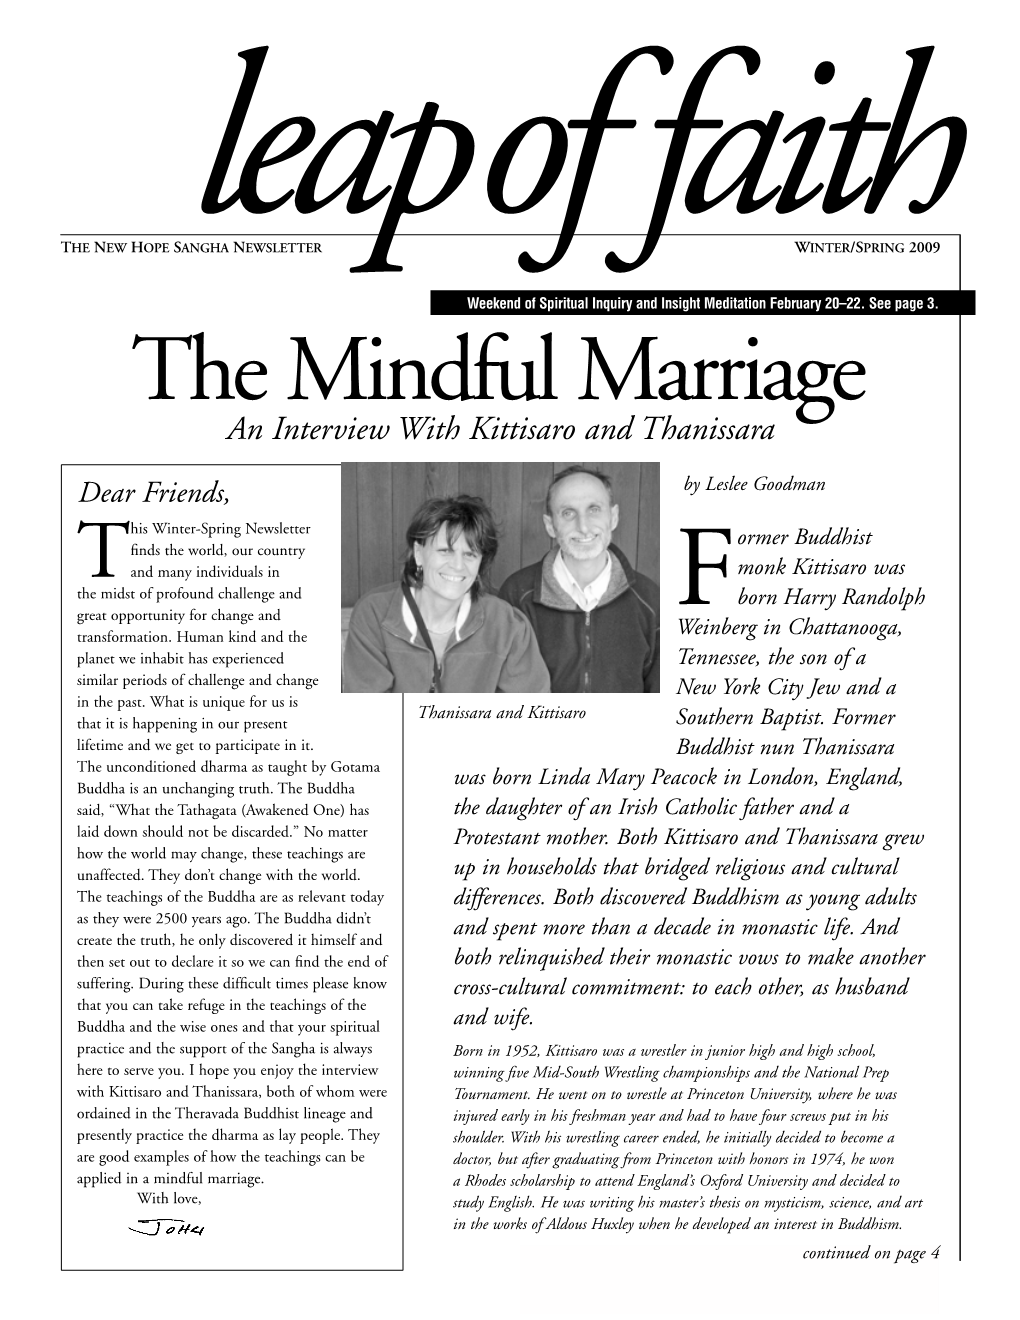 The Mindful Marriage an Interview with Kittisaro and Thanissara